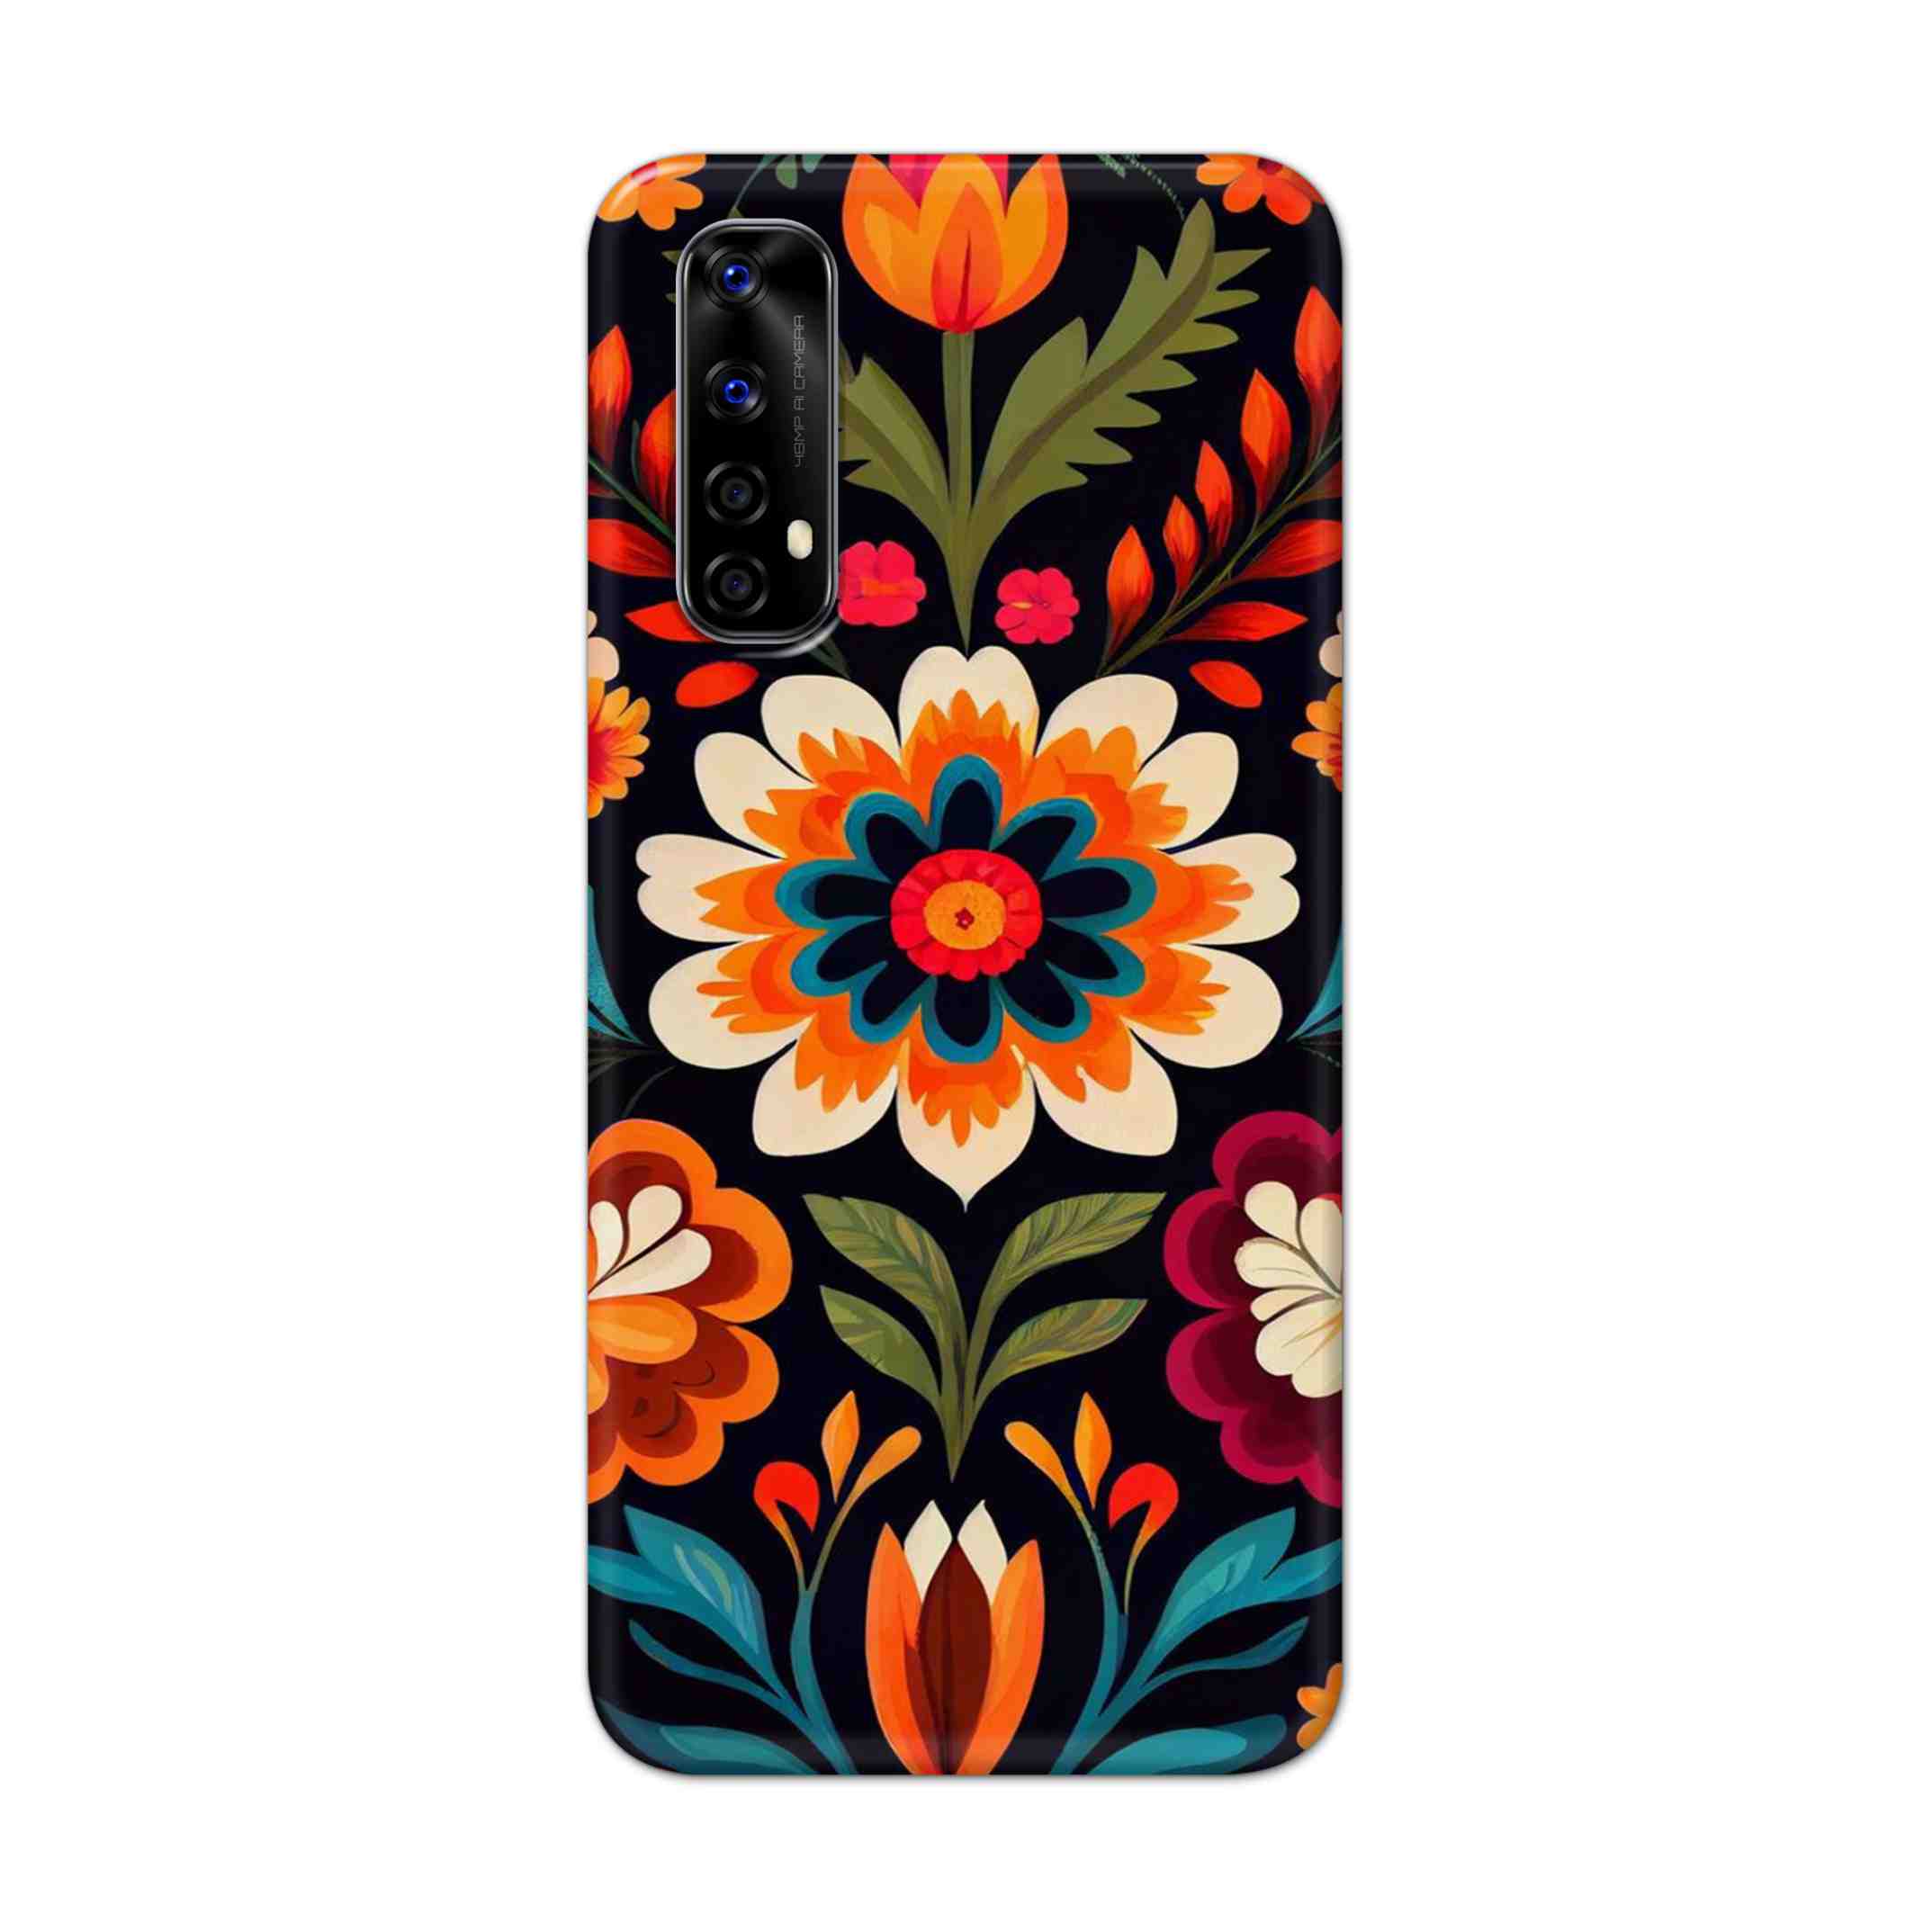 Buy Flower Hard Back Mobile Phone Case Cover For Realme Narzo 20 Pro Online